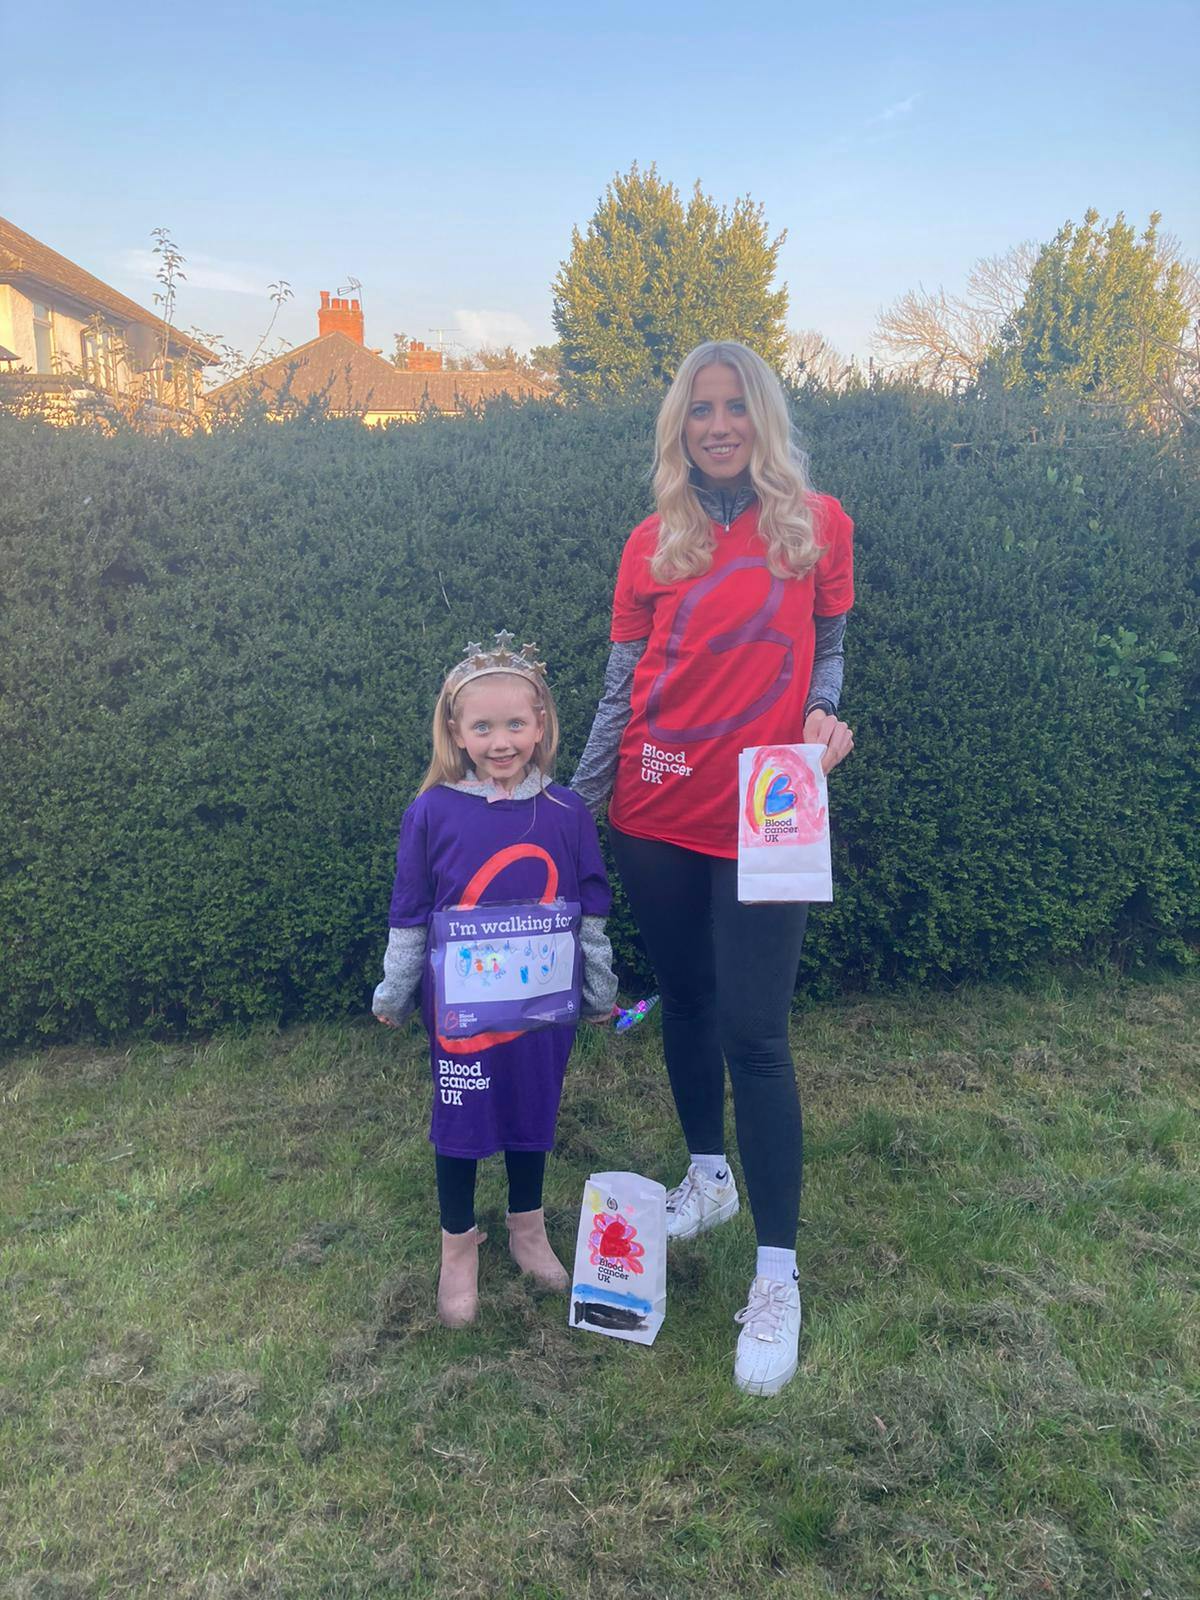 Isla aged 5 and her mum Amy standing outside wearing their Blood Cancer UK t shirts and holding luminary bags with drawings on